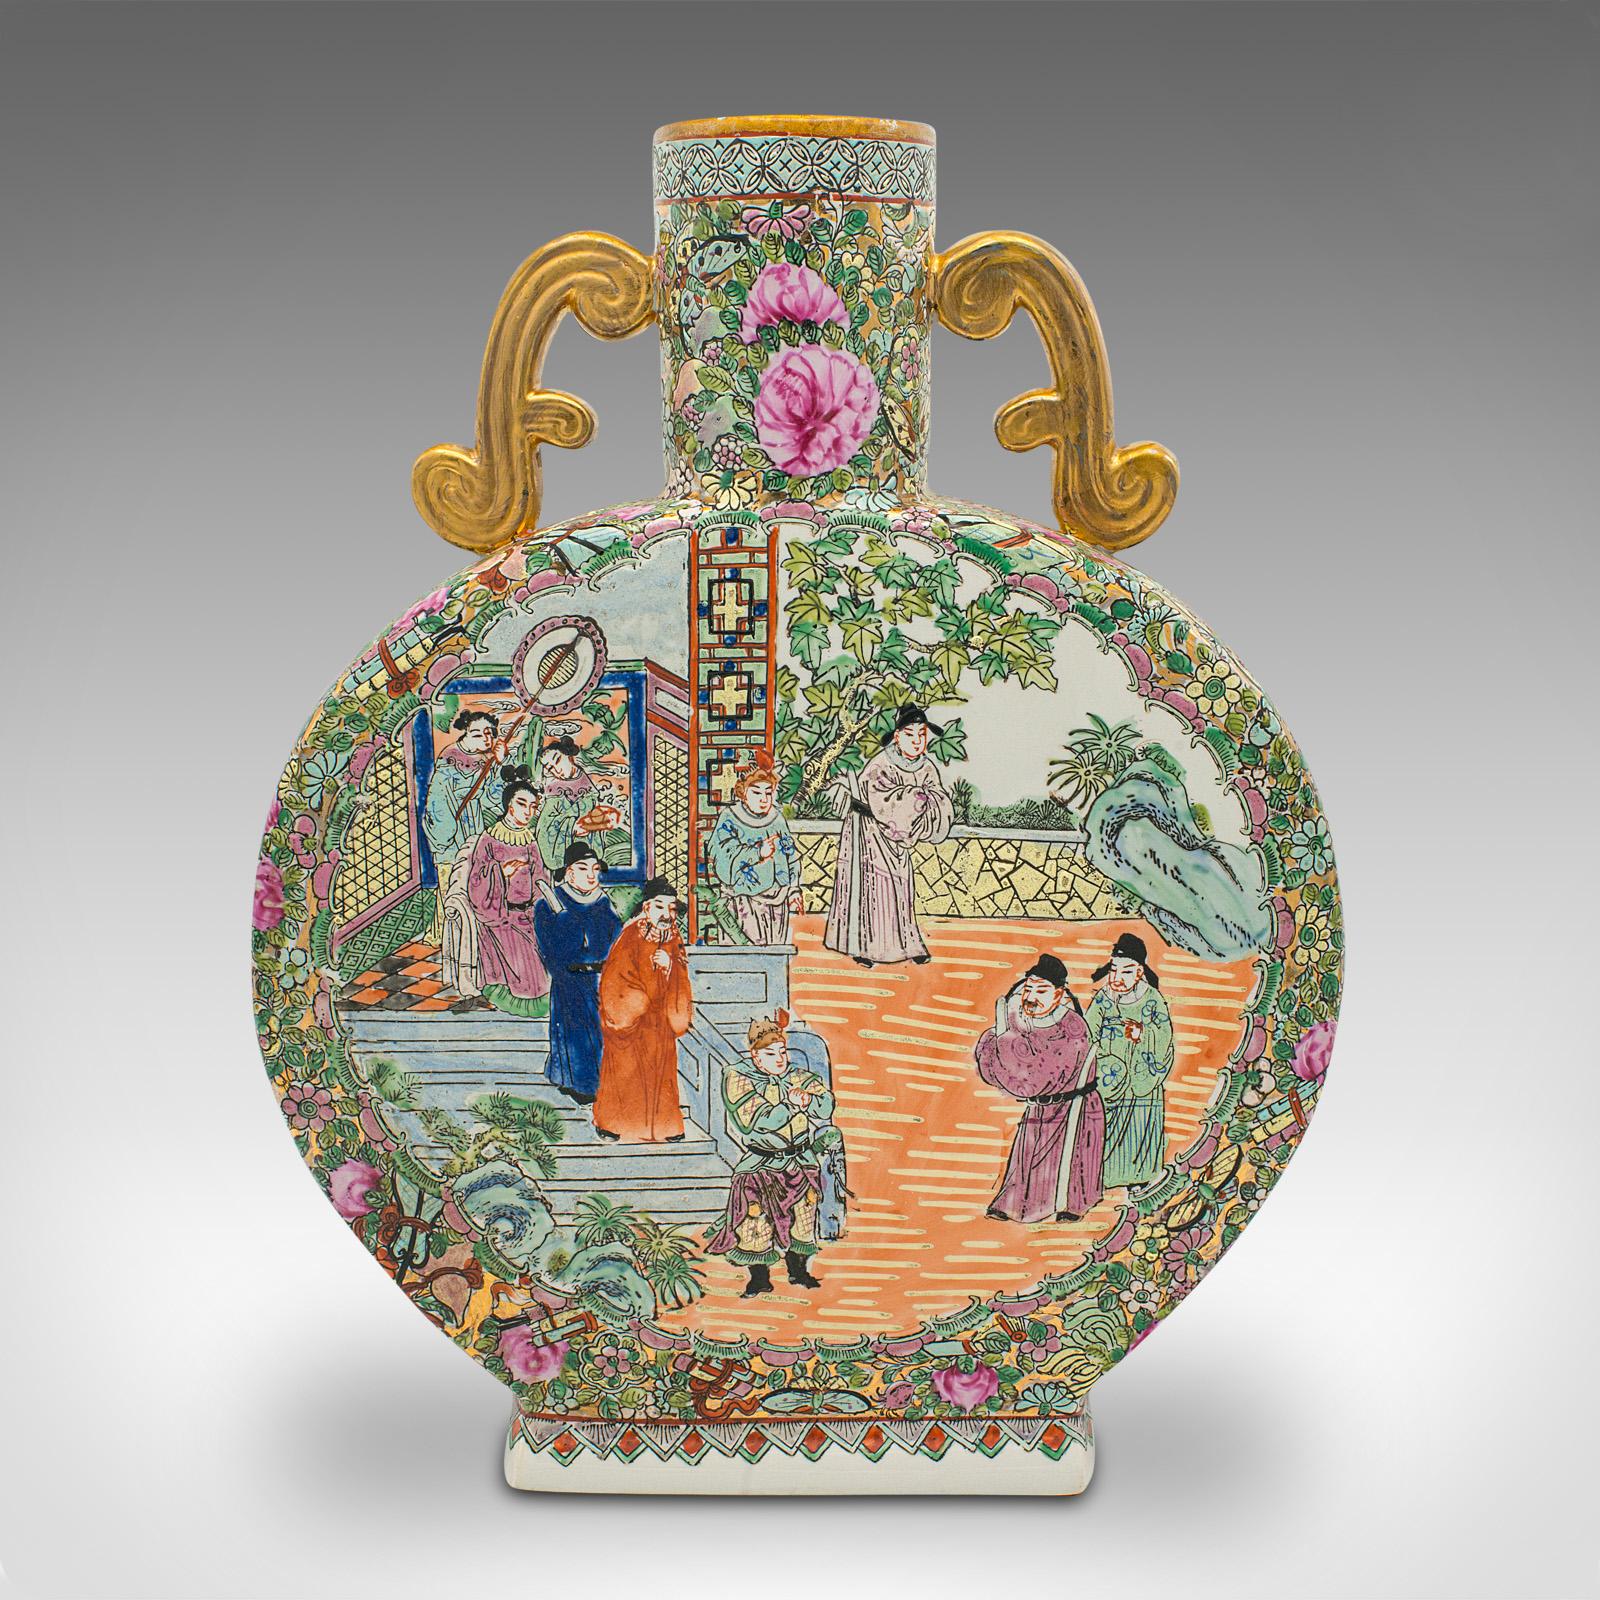 This is a large antique moon vase. A Chinese, ceramic decorative flower urn with hand-painted decoration, dating to the Qing dynasty during the late Victorian period, circa 1900.

Ornate and of distinctive moon form - a treat for